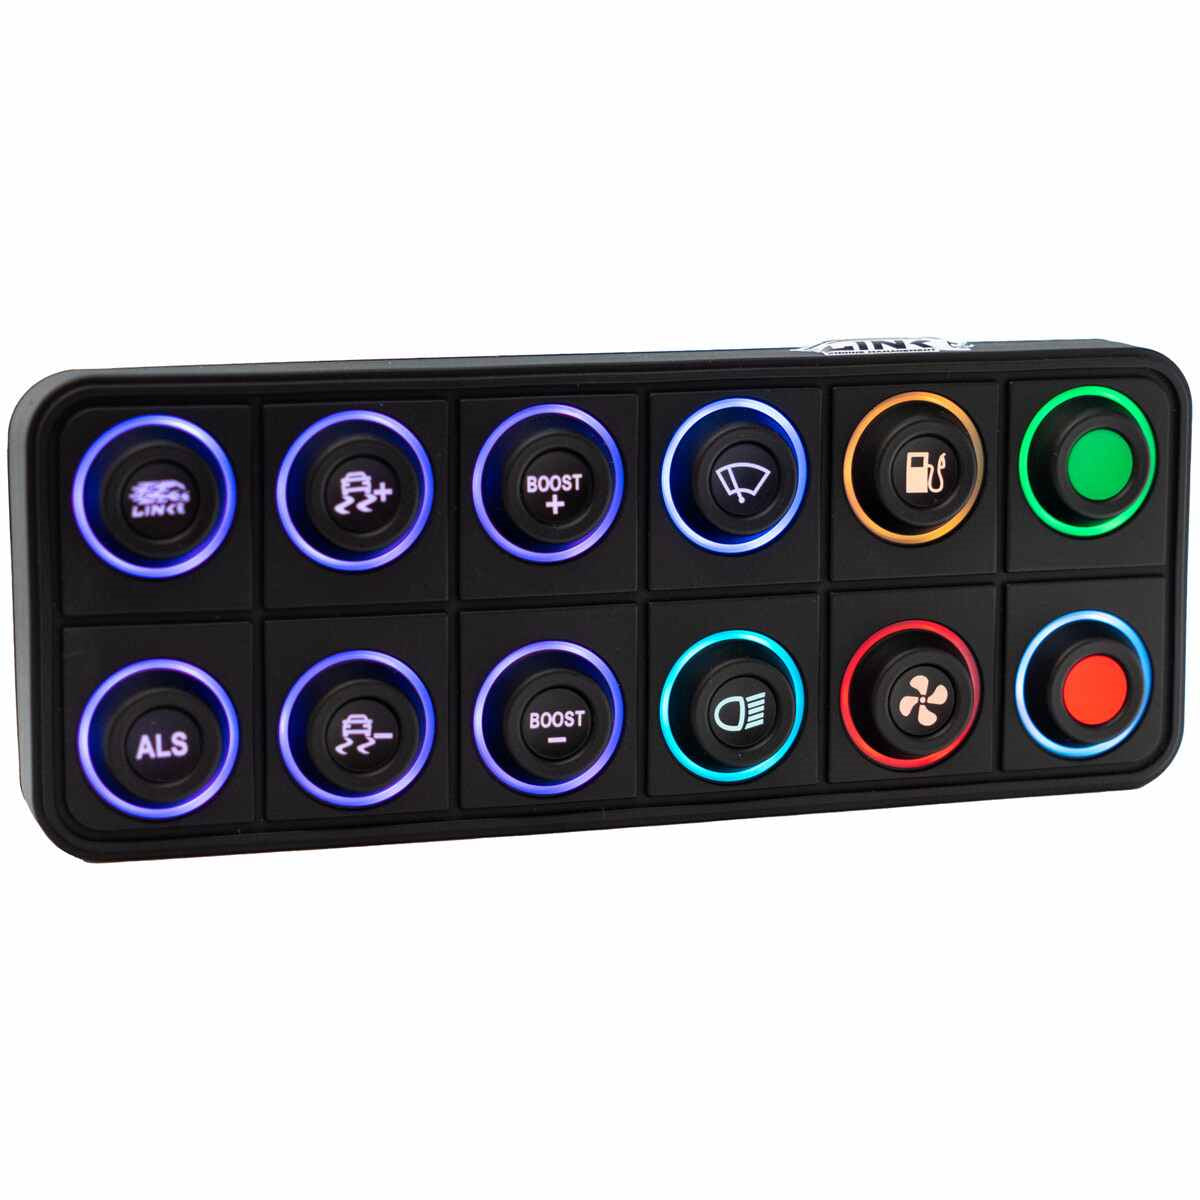 Link CAN Keypad 12 button - 101-0239